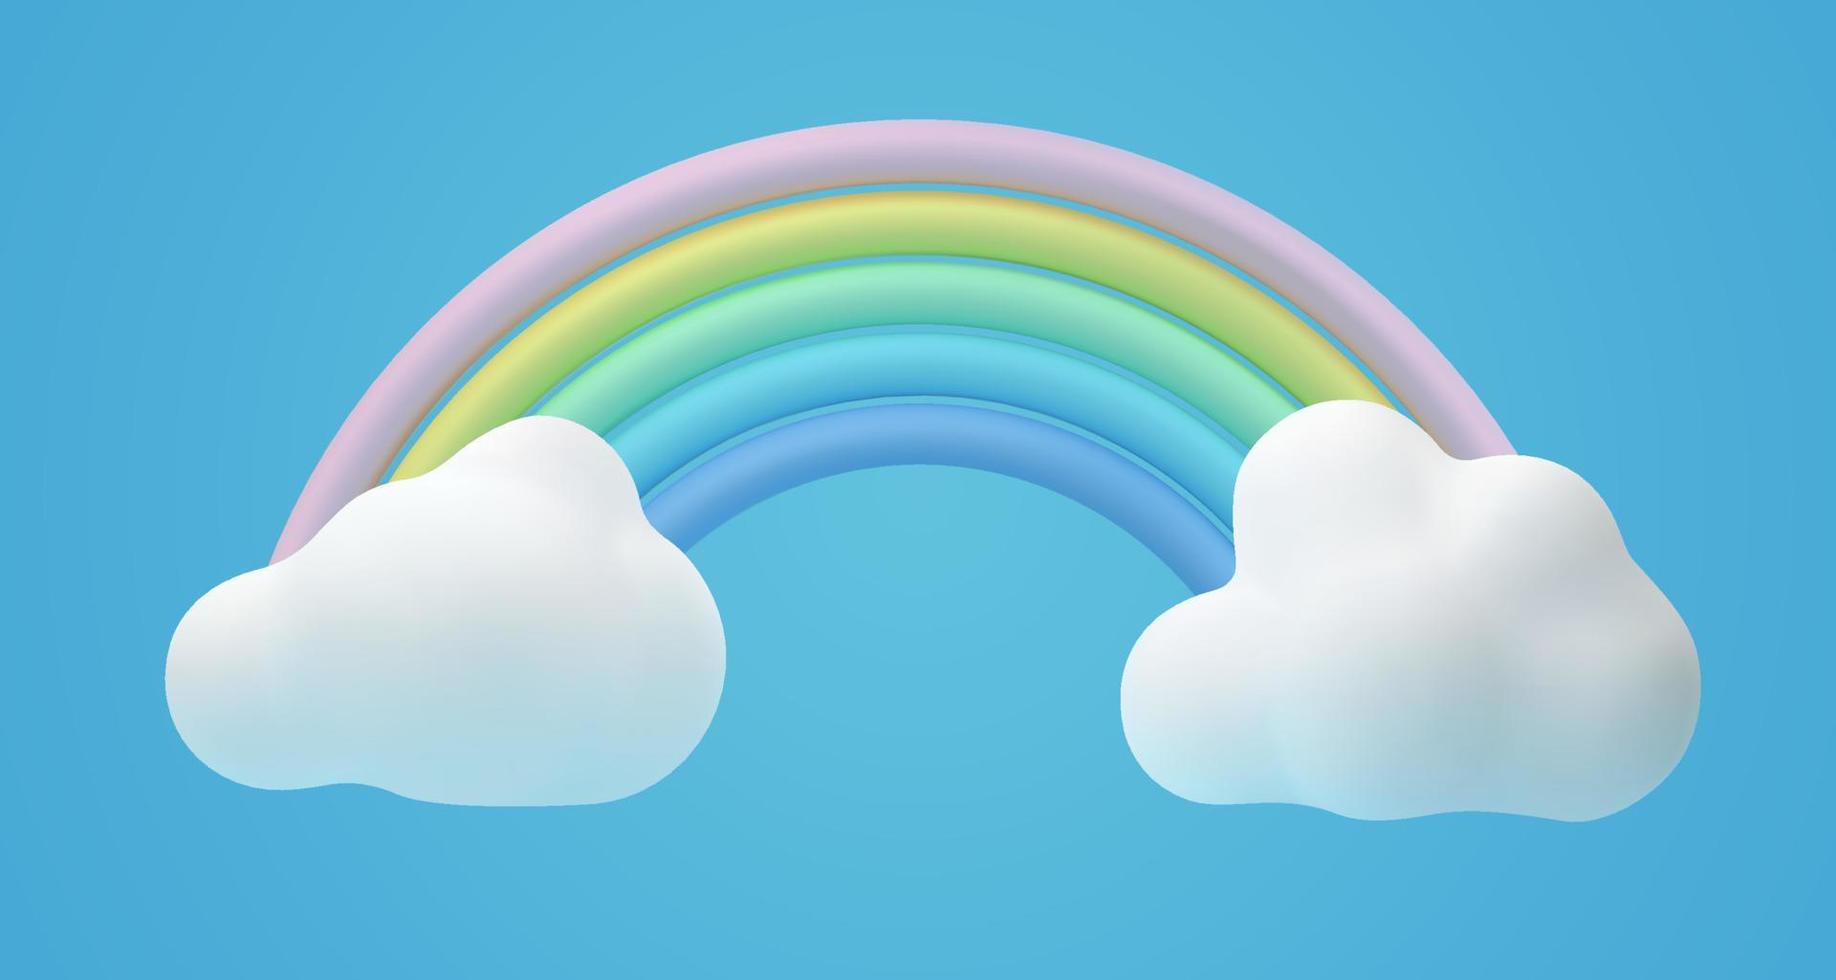 Rainbow with clouds in 3D vector style. Modern design of children's illustration